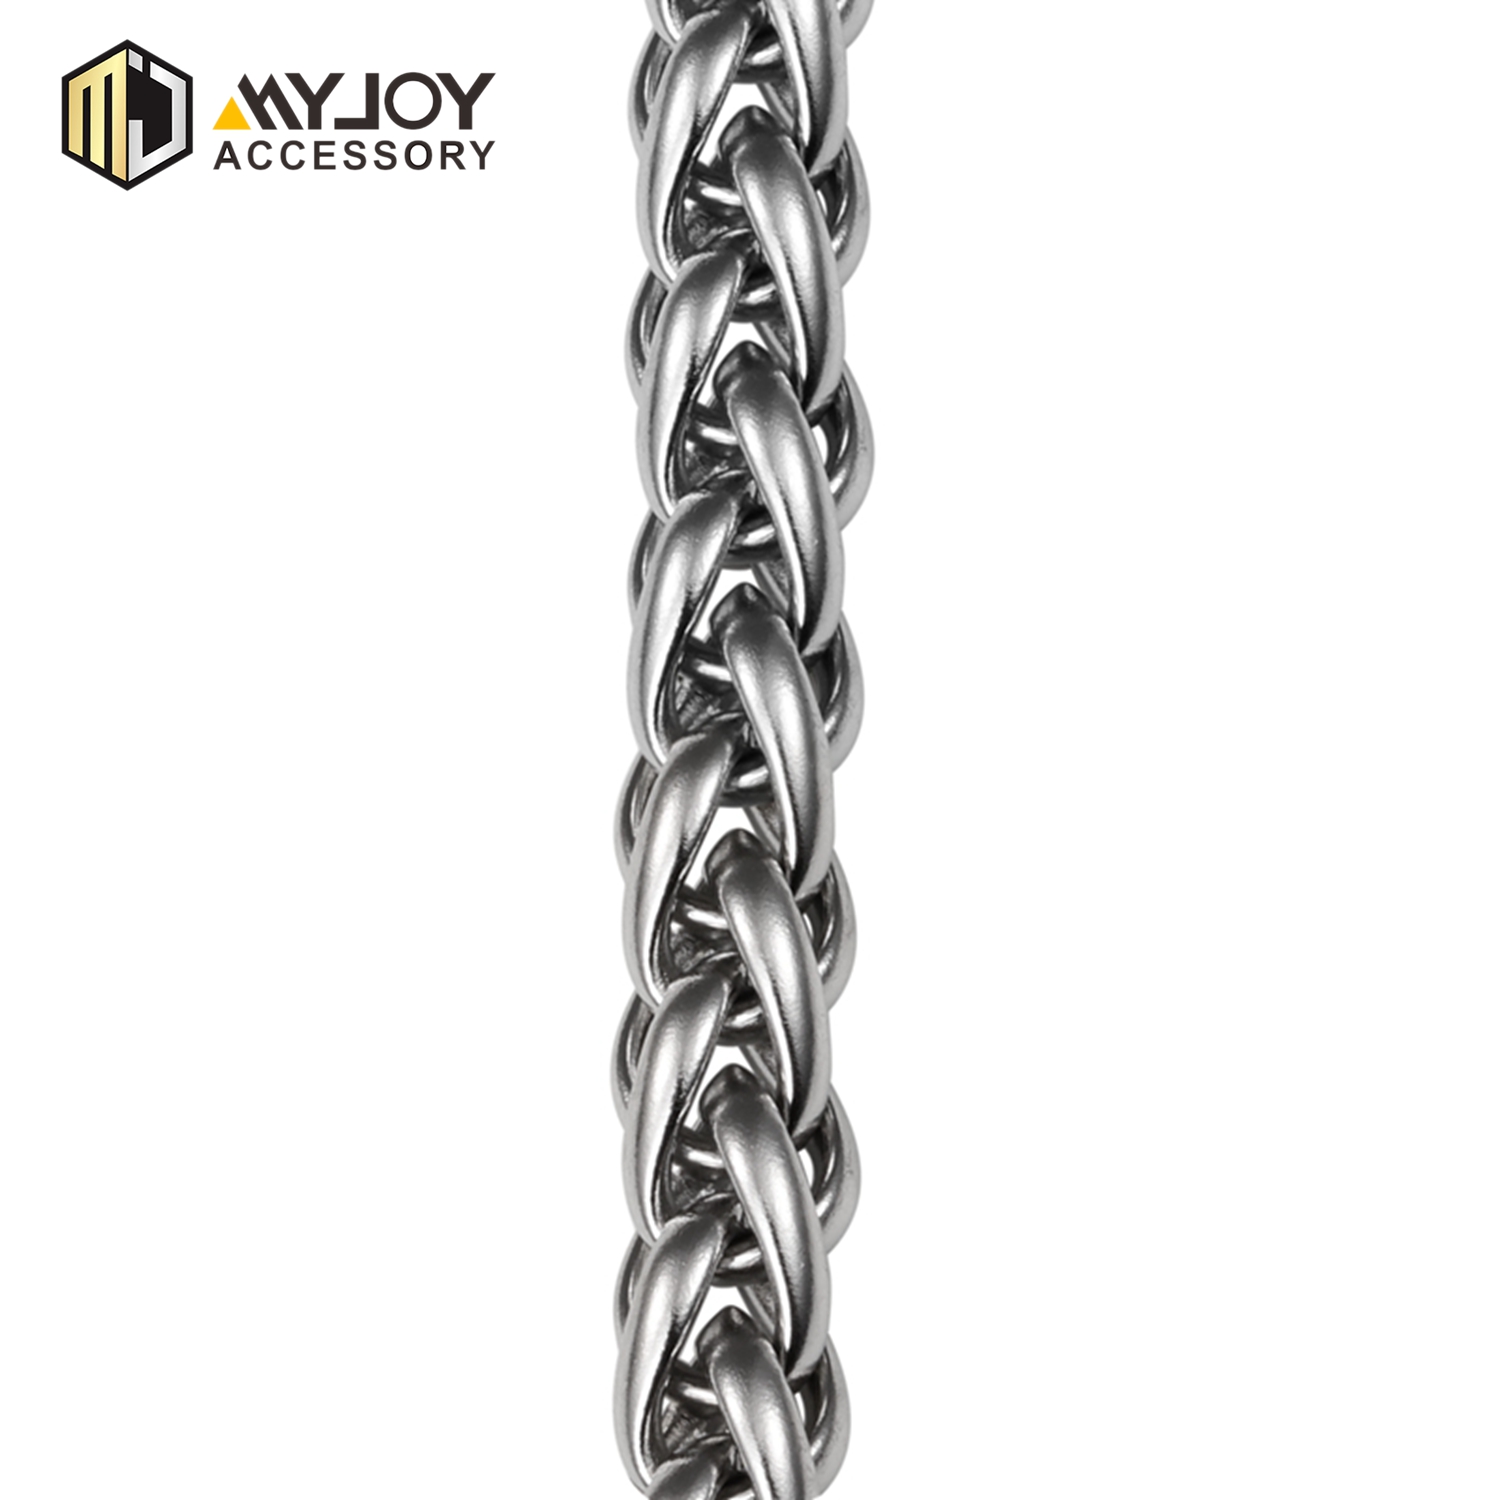 MYJOY Top bag chain for business for bags-1